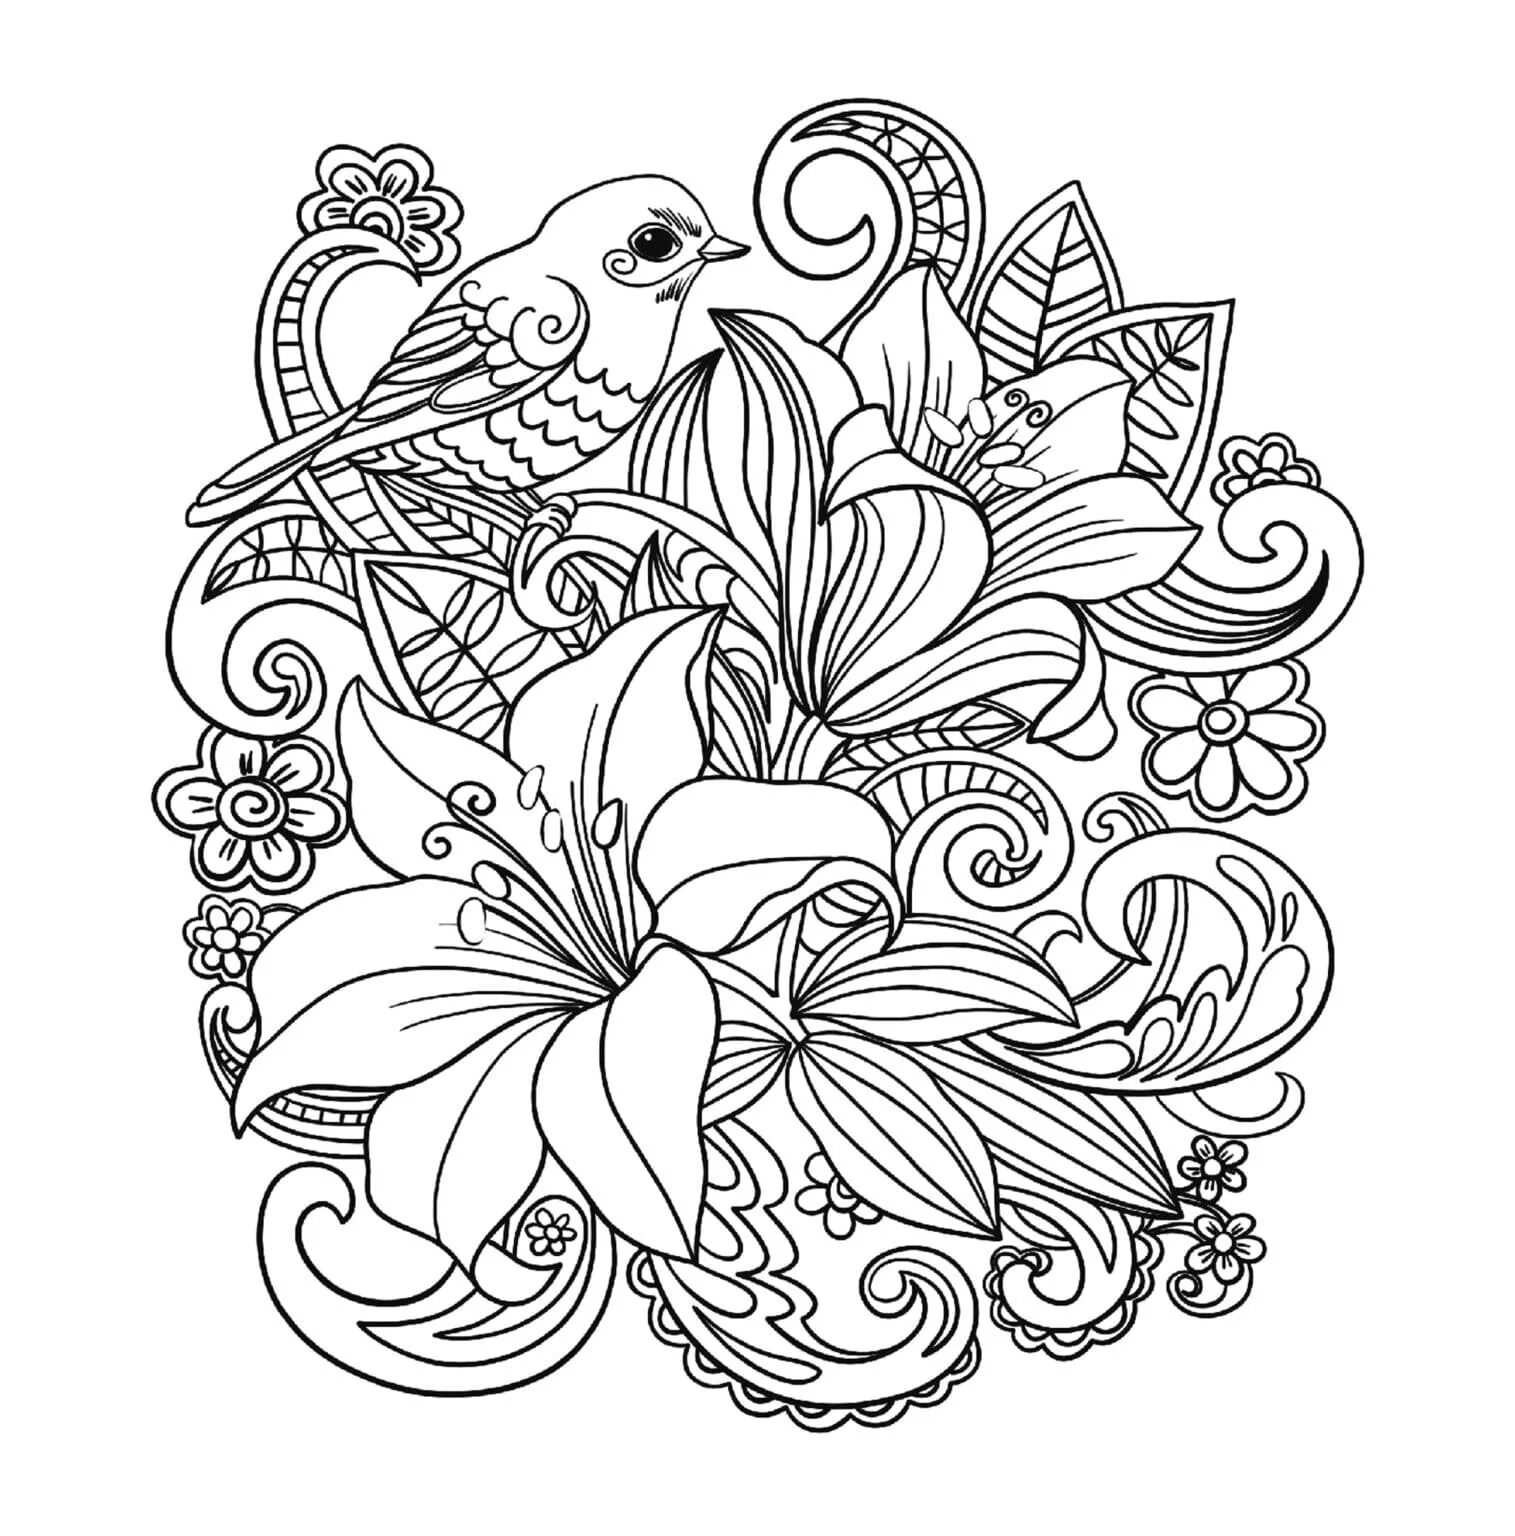 Excellent medium difficulty coloring book